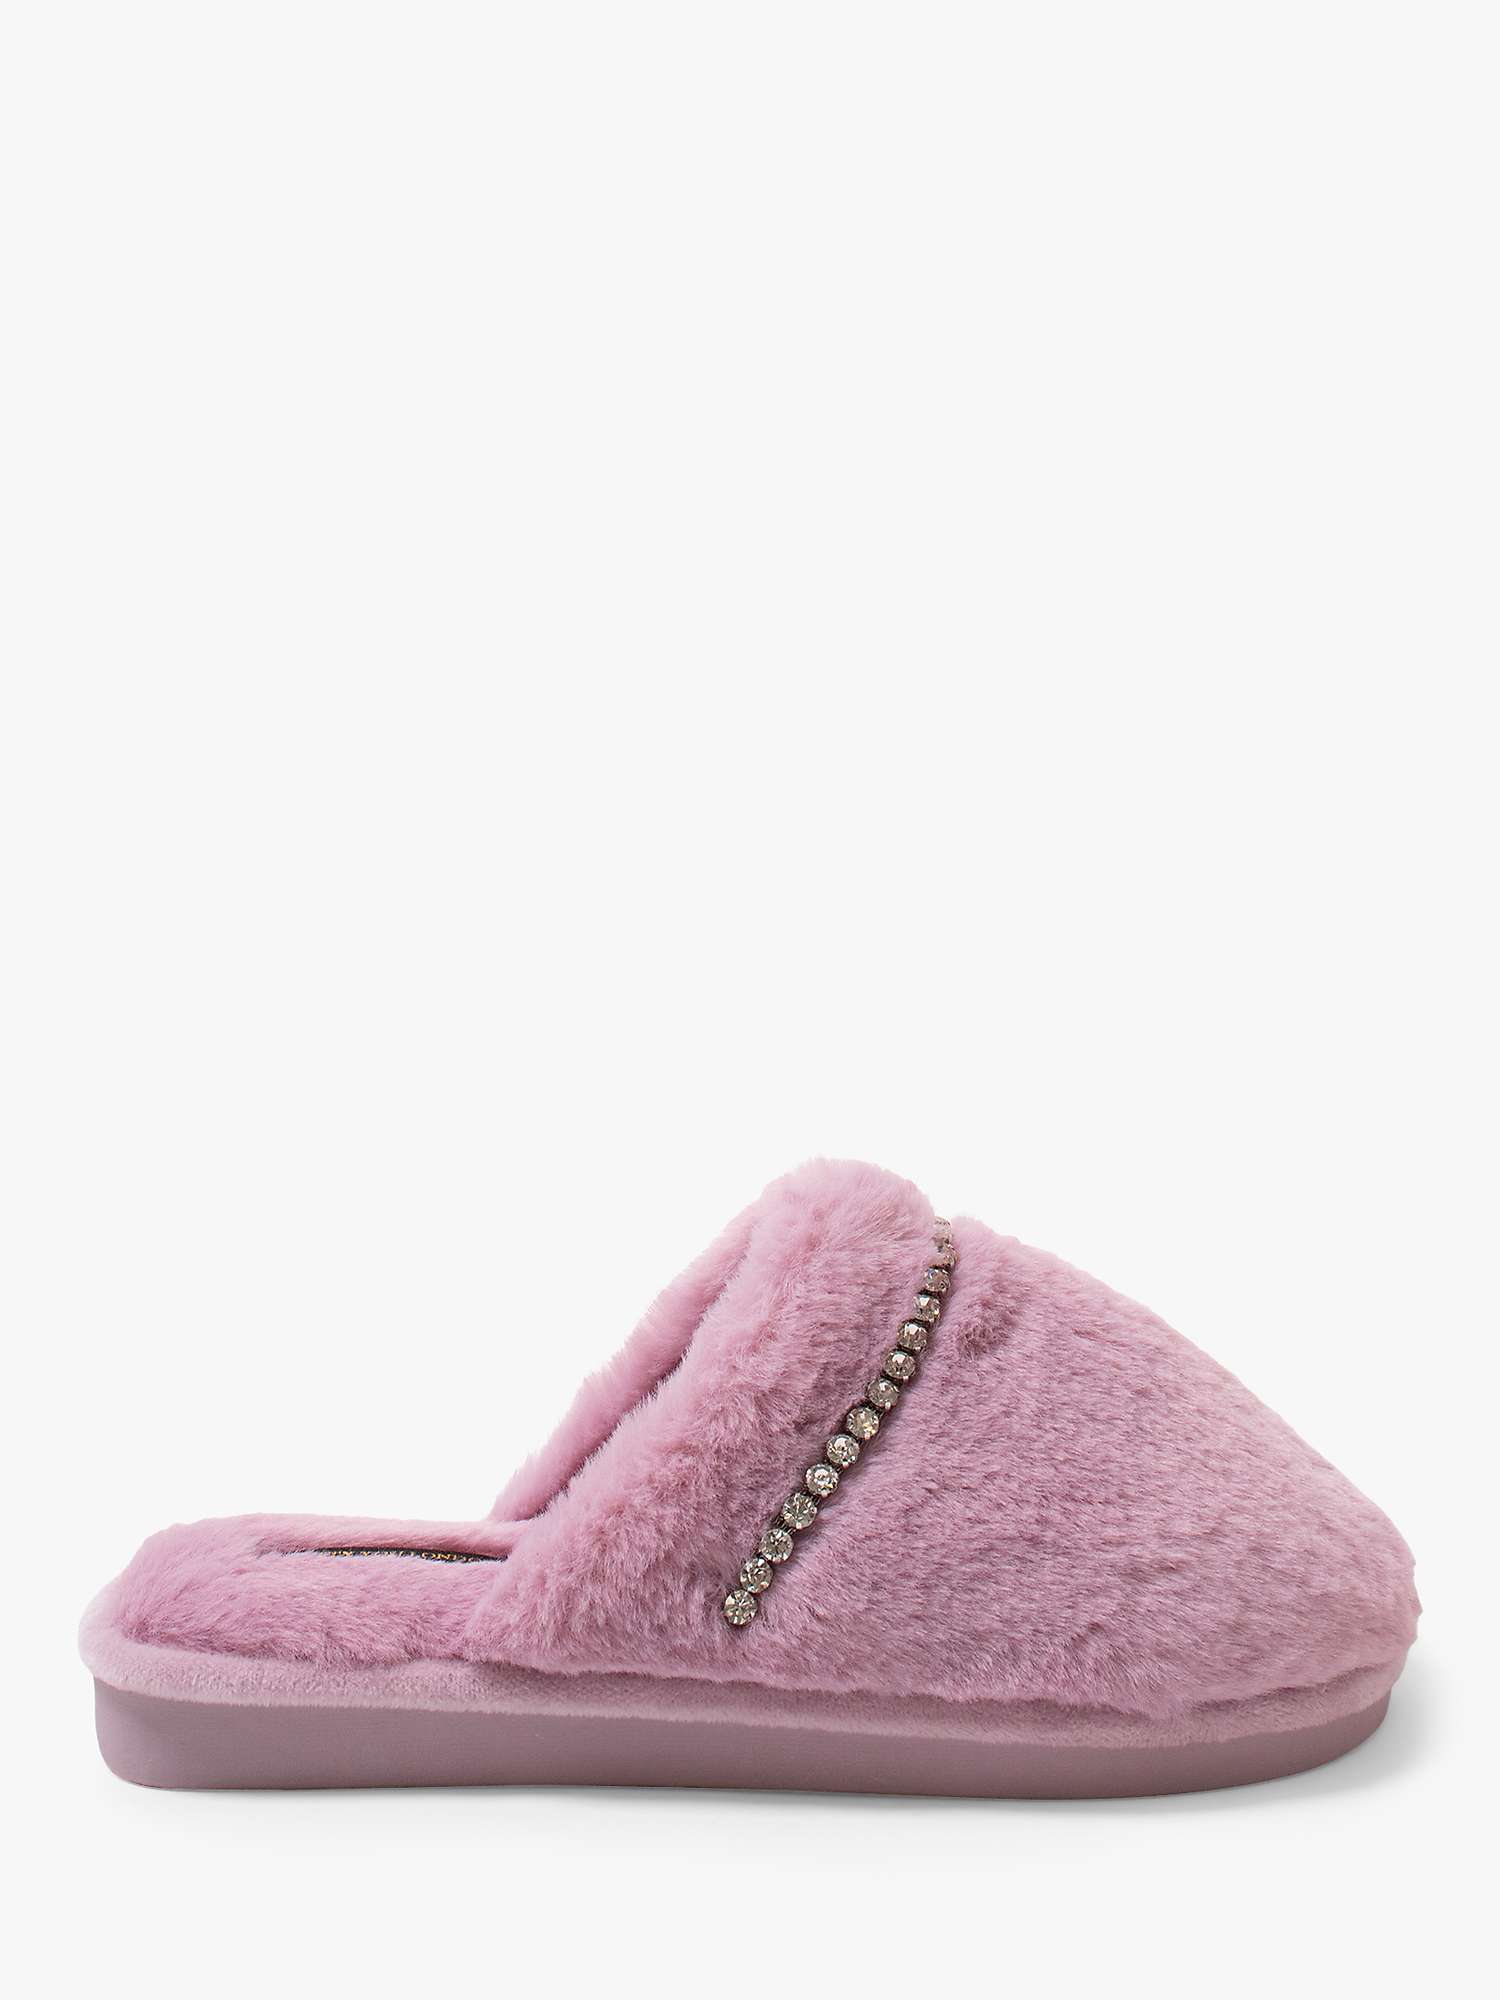 Buy Pretty You London Gracie Embellished Mule Slippers Online at johnlewis.com